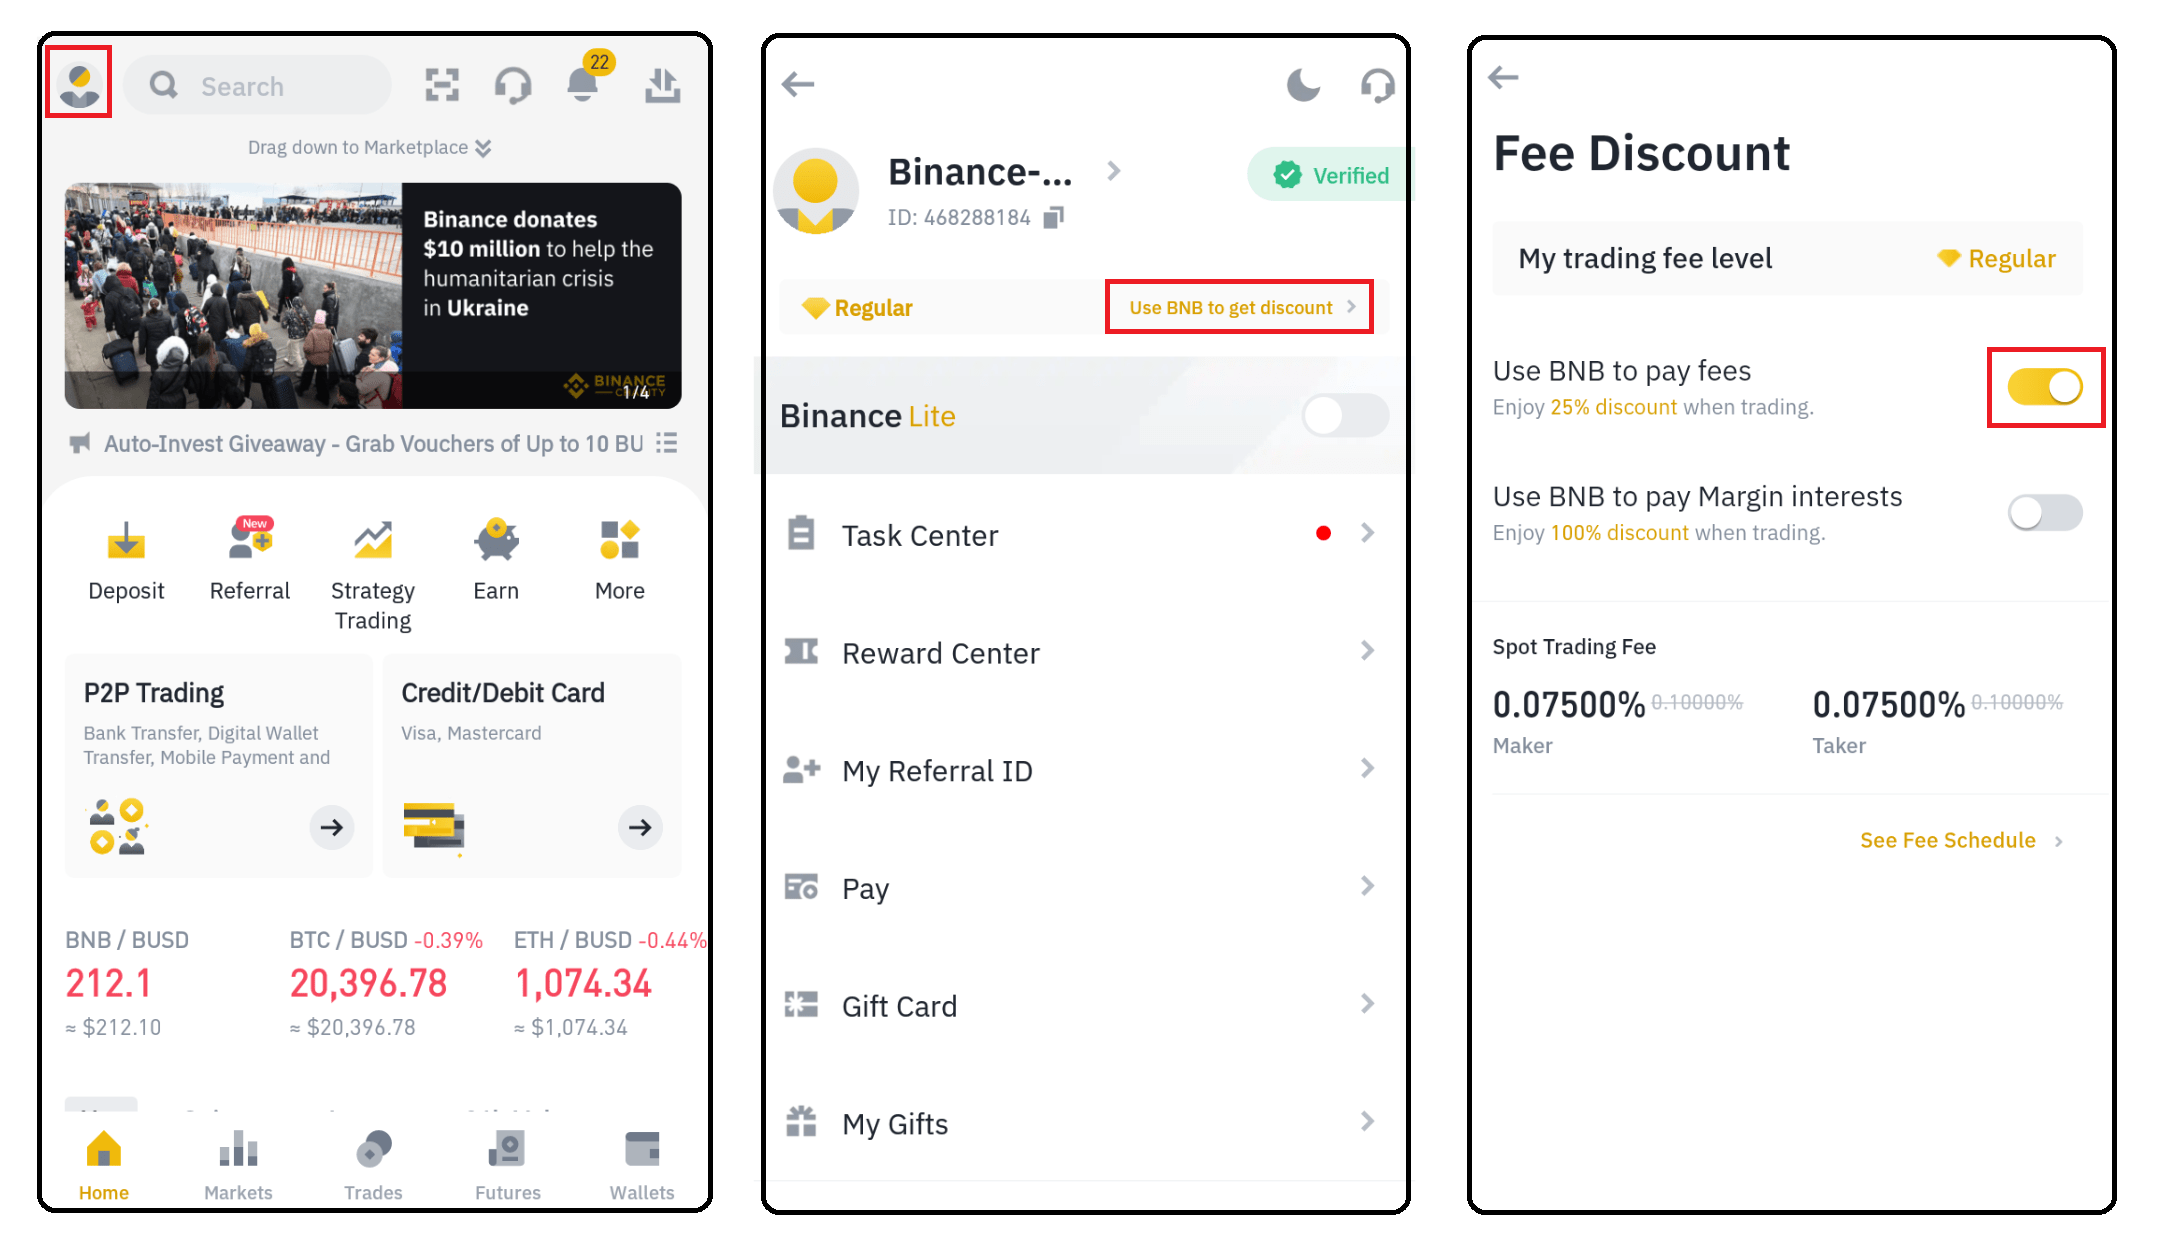 Steps to use BNB as a transaction fee